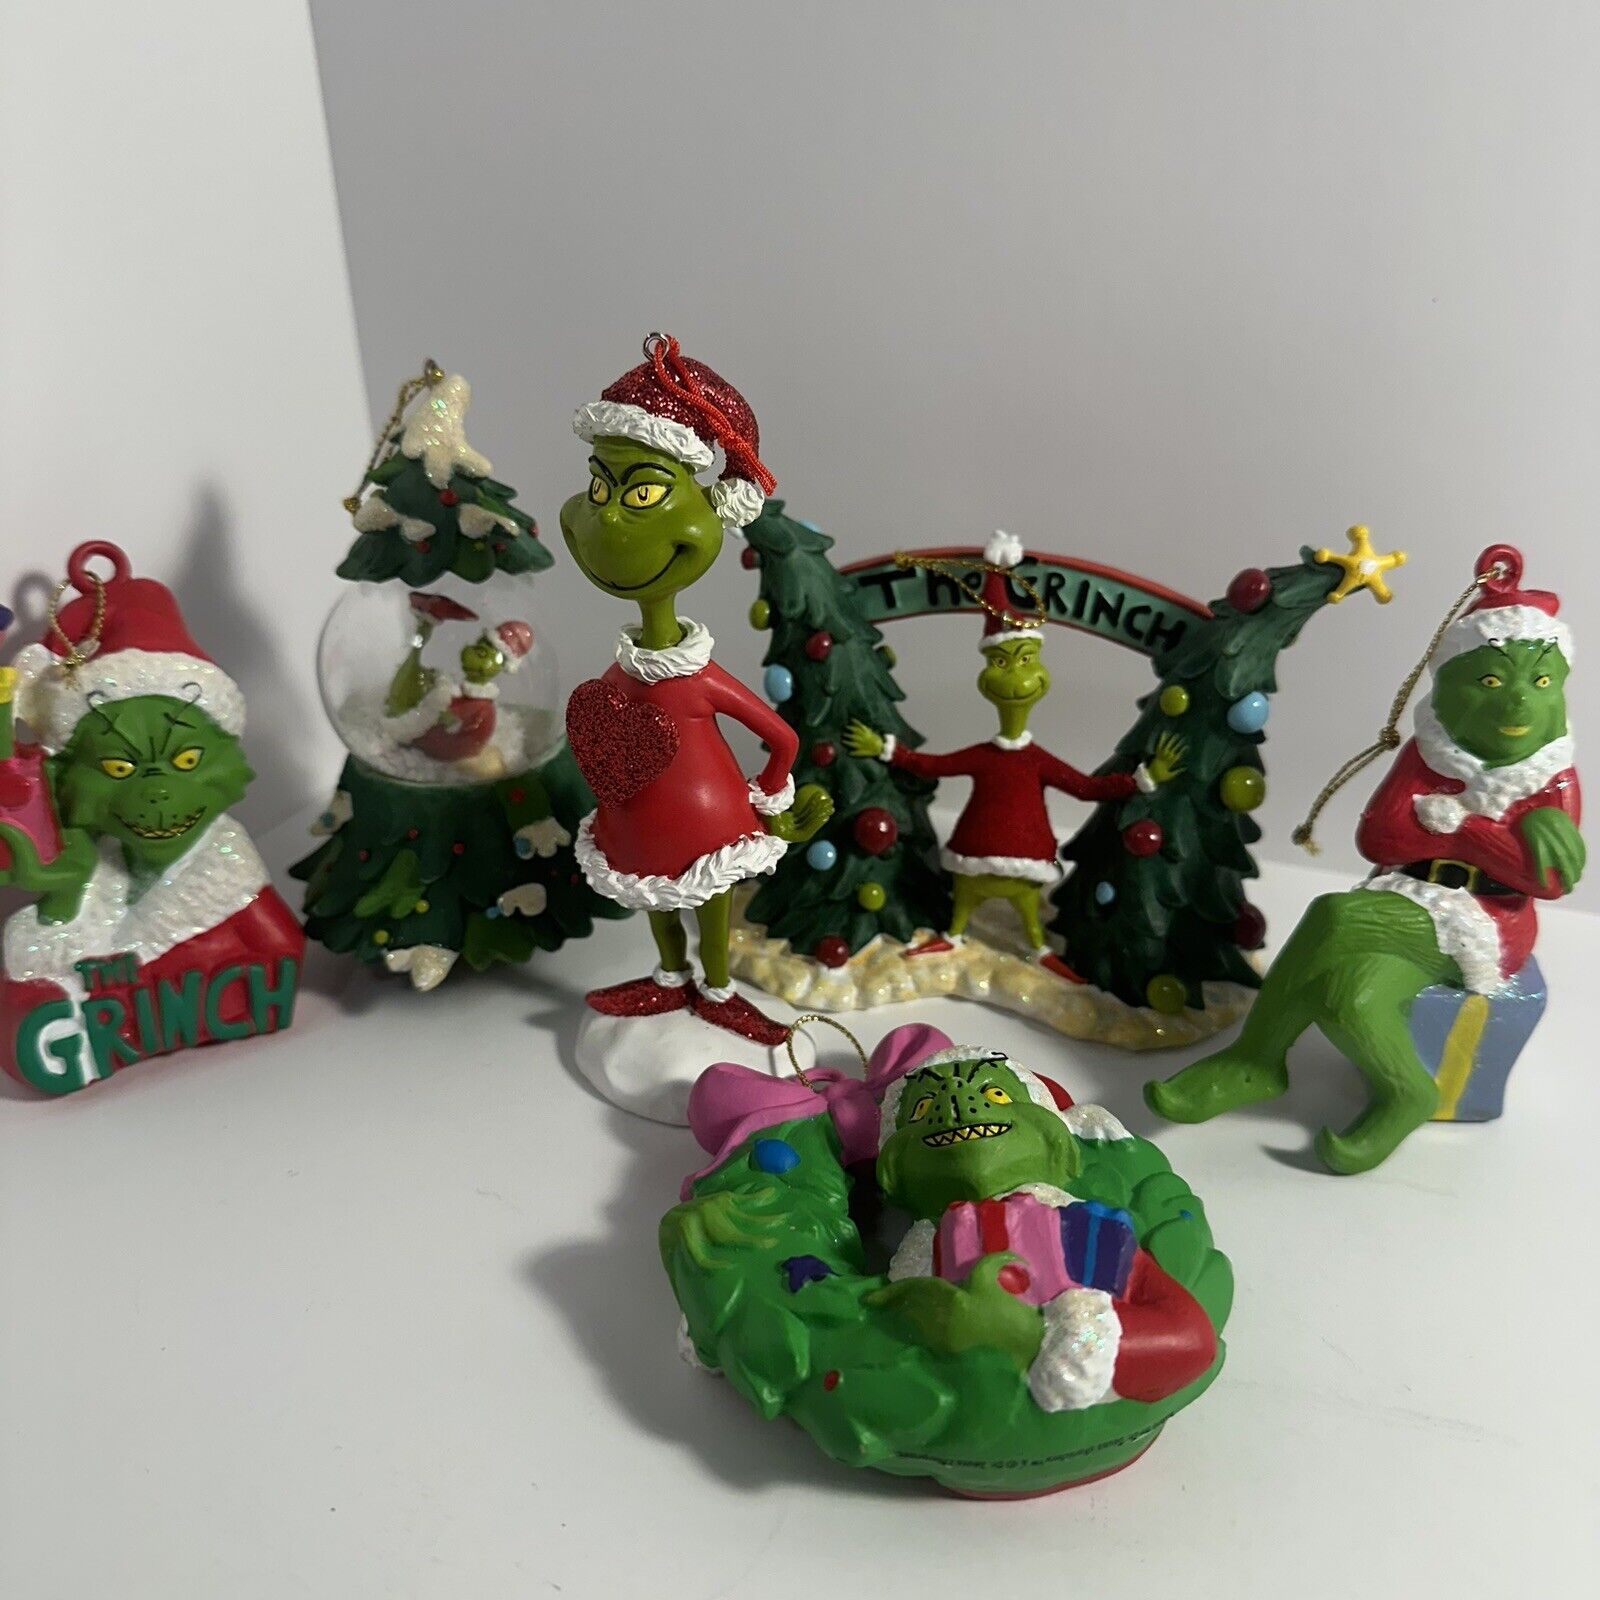 Lot of 6 Grinch Christmas Ornaments - Excellent Condition - BIG HEART Grinch